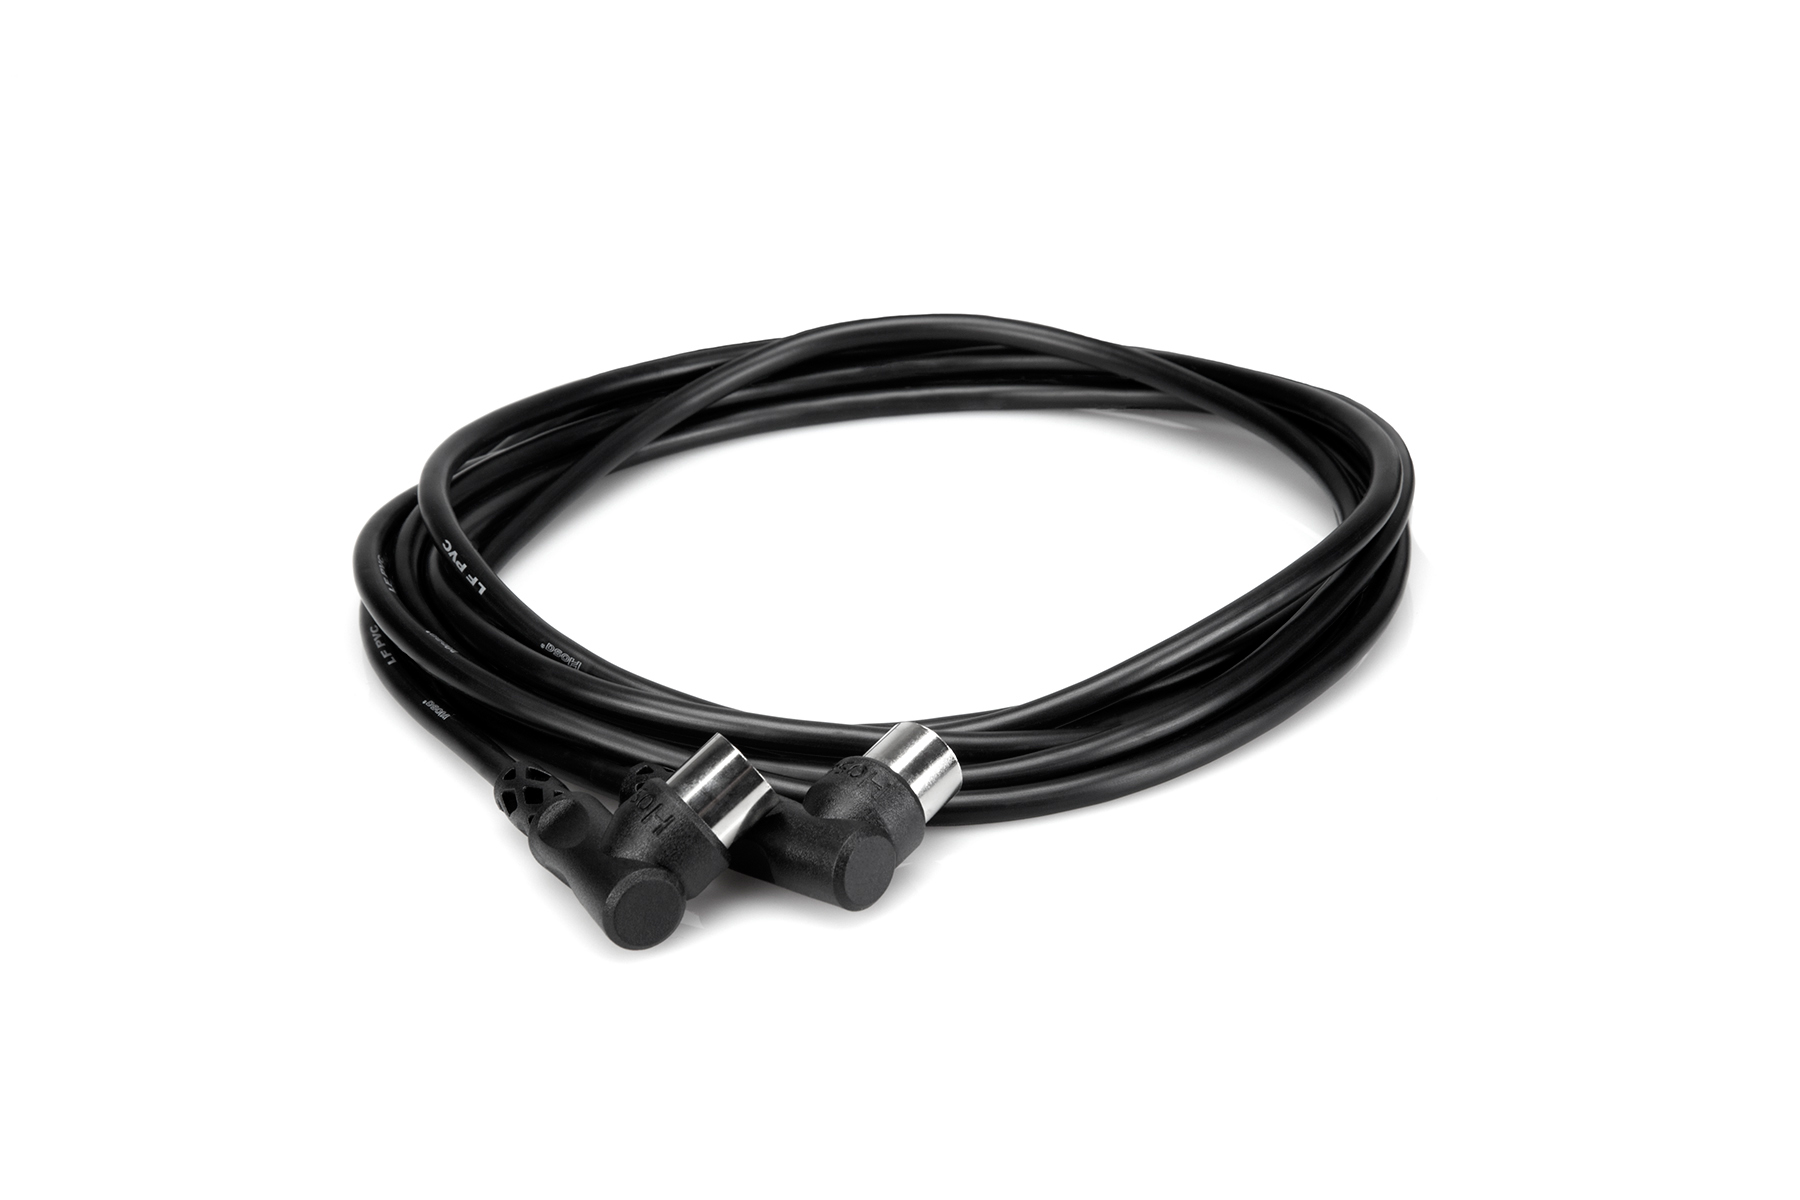 Hosa MID-515 Pro MIDI Cable Serviceable 5-pin DIN to Same 15 Feet 